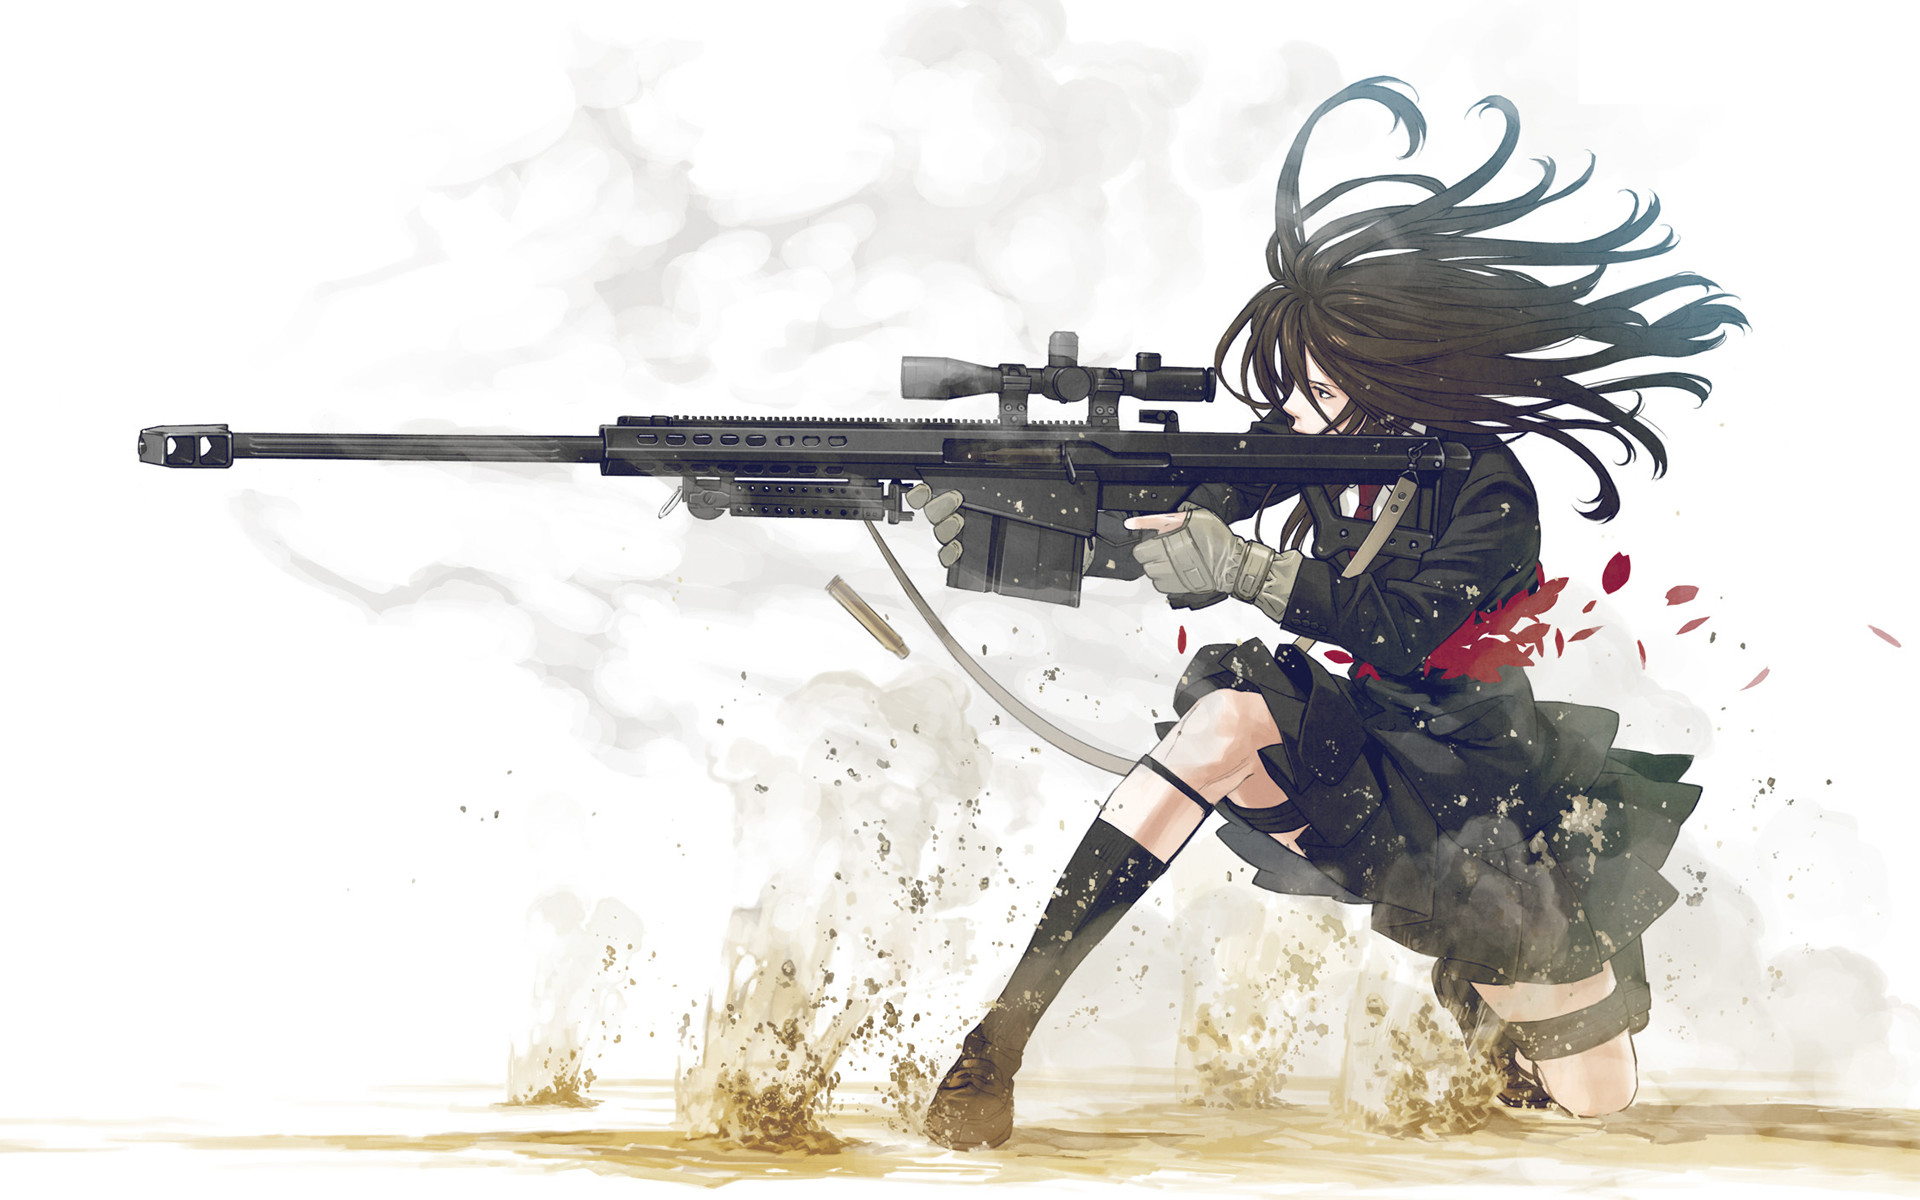 1920x1200 ... Girl with a sniper rifle